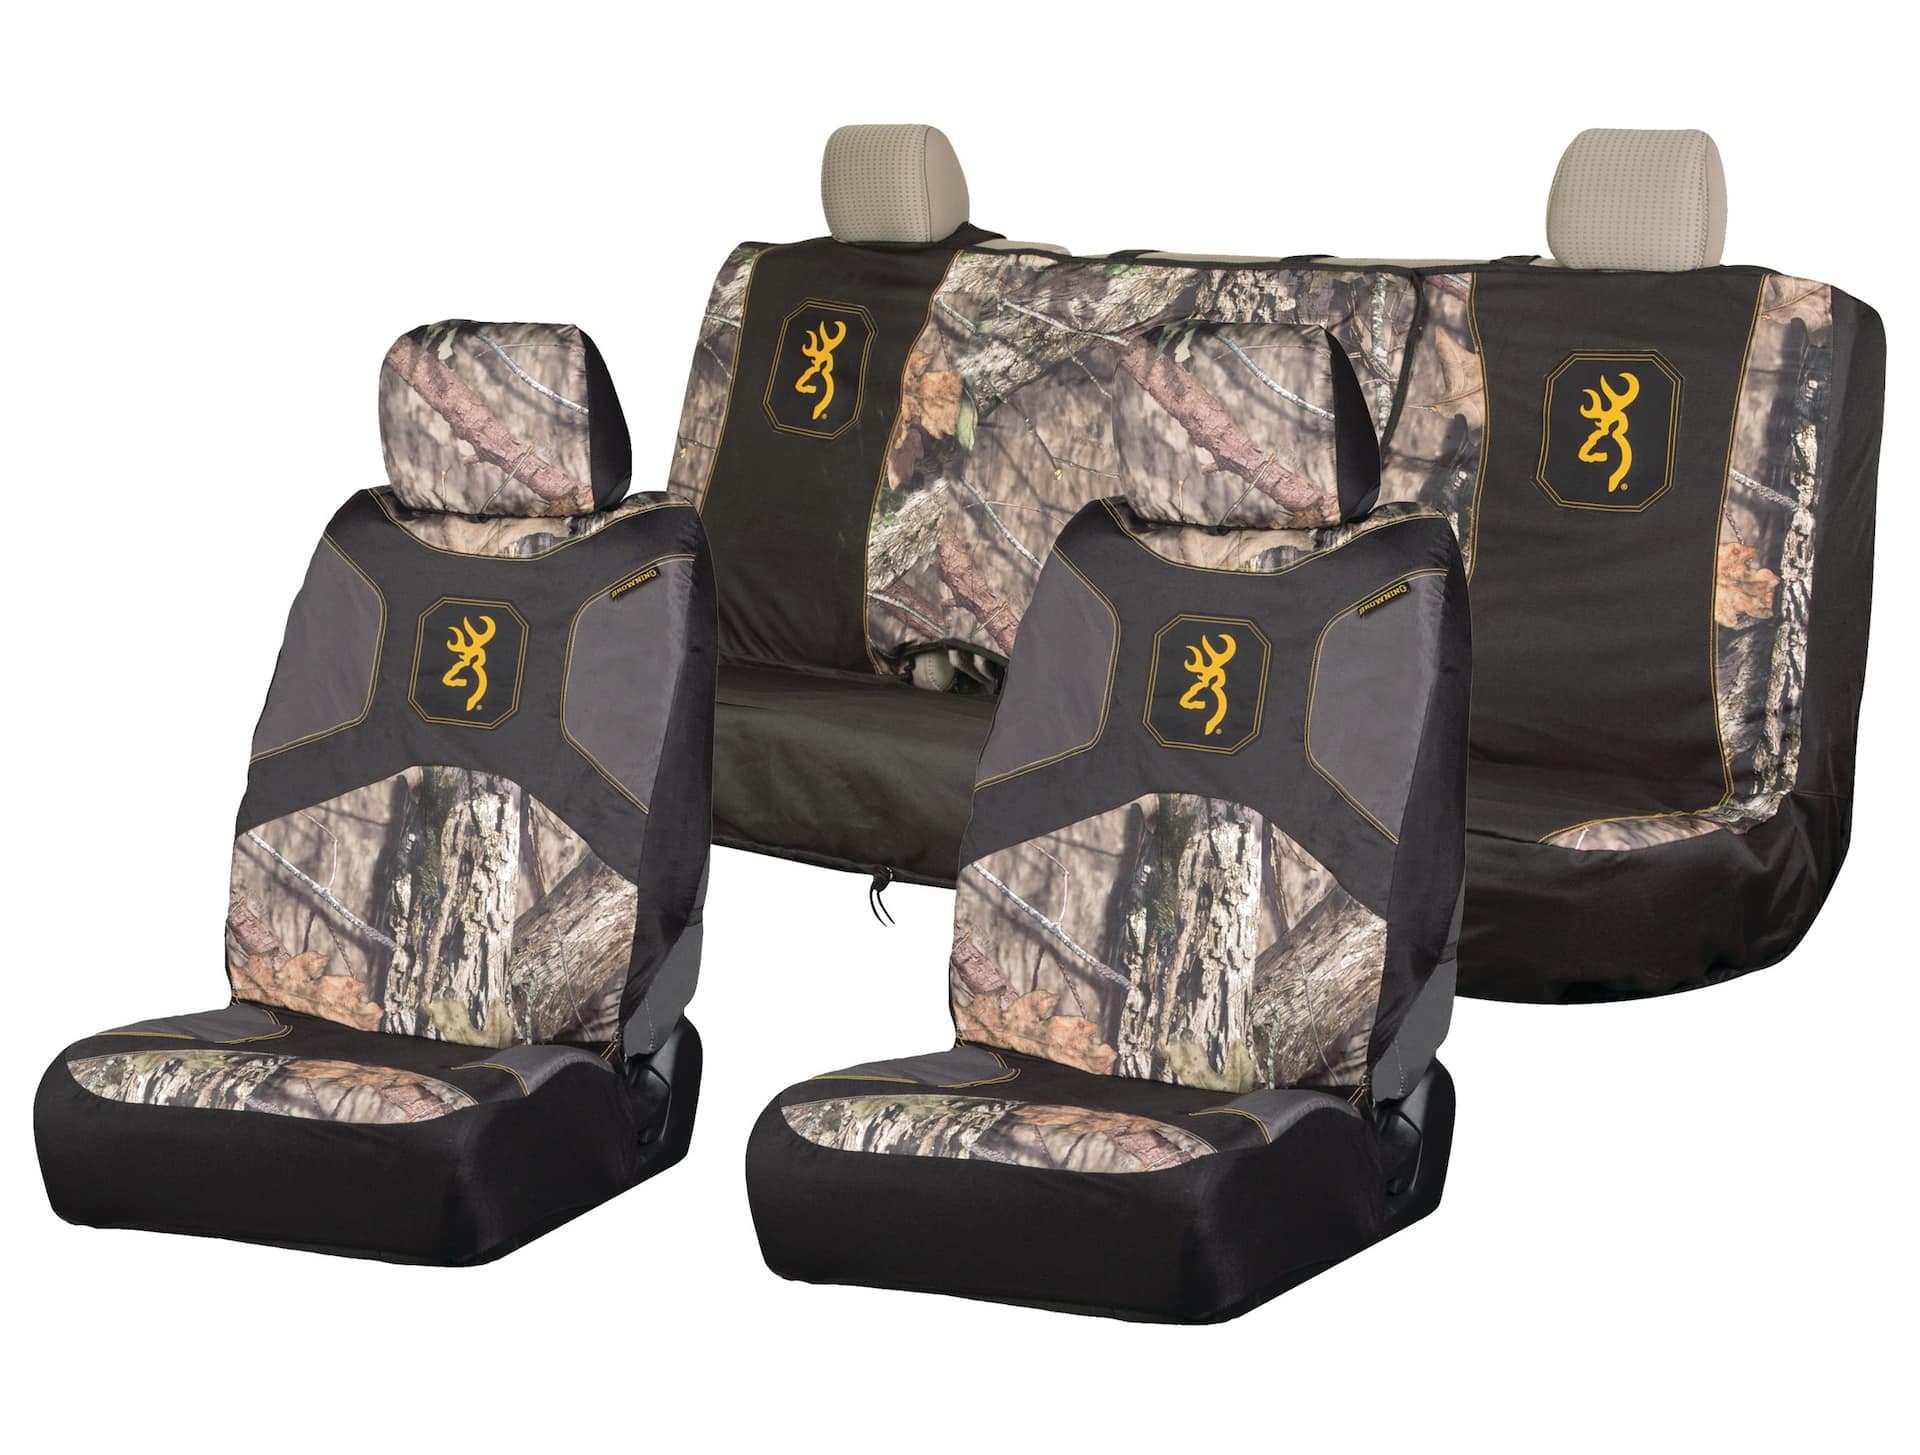 Truck Seat Covers, Camo & Pet Styles Available